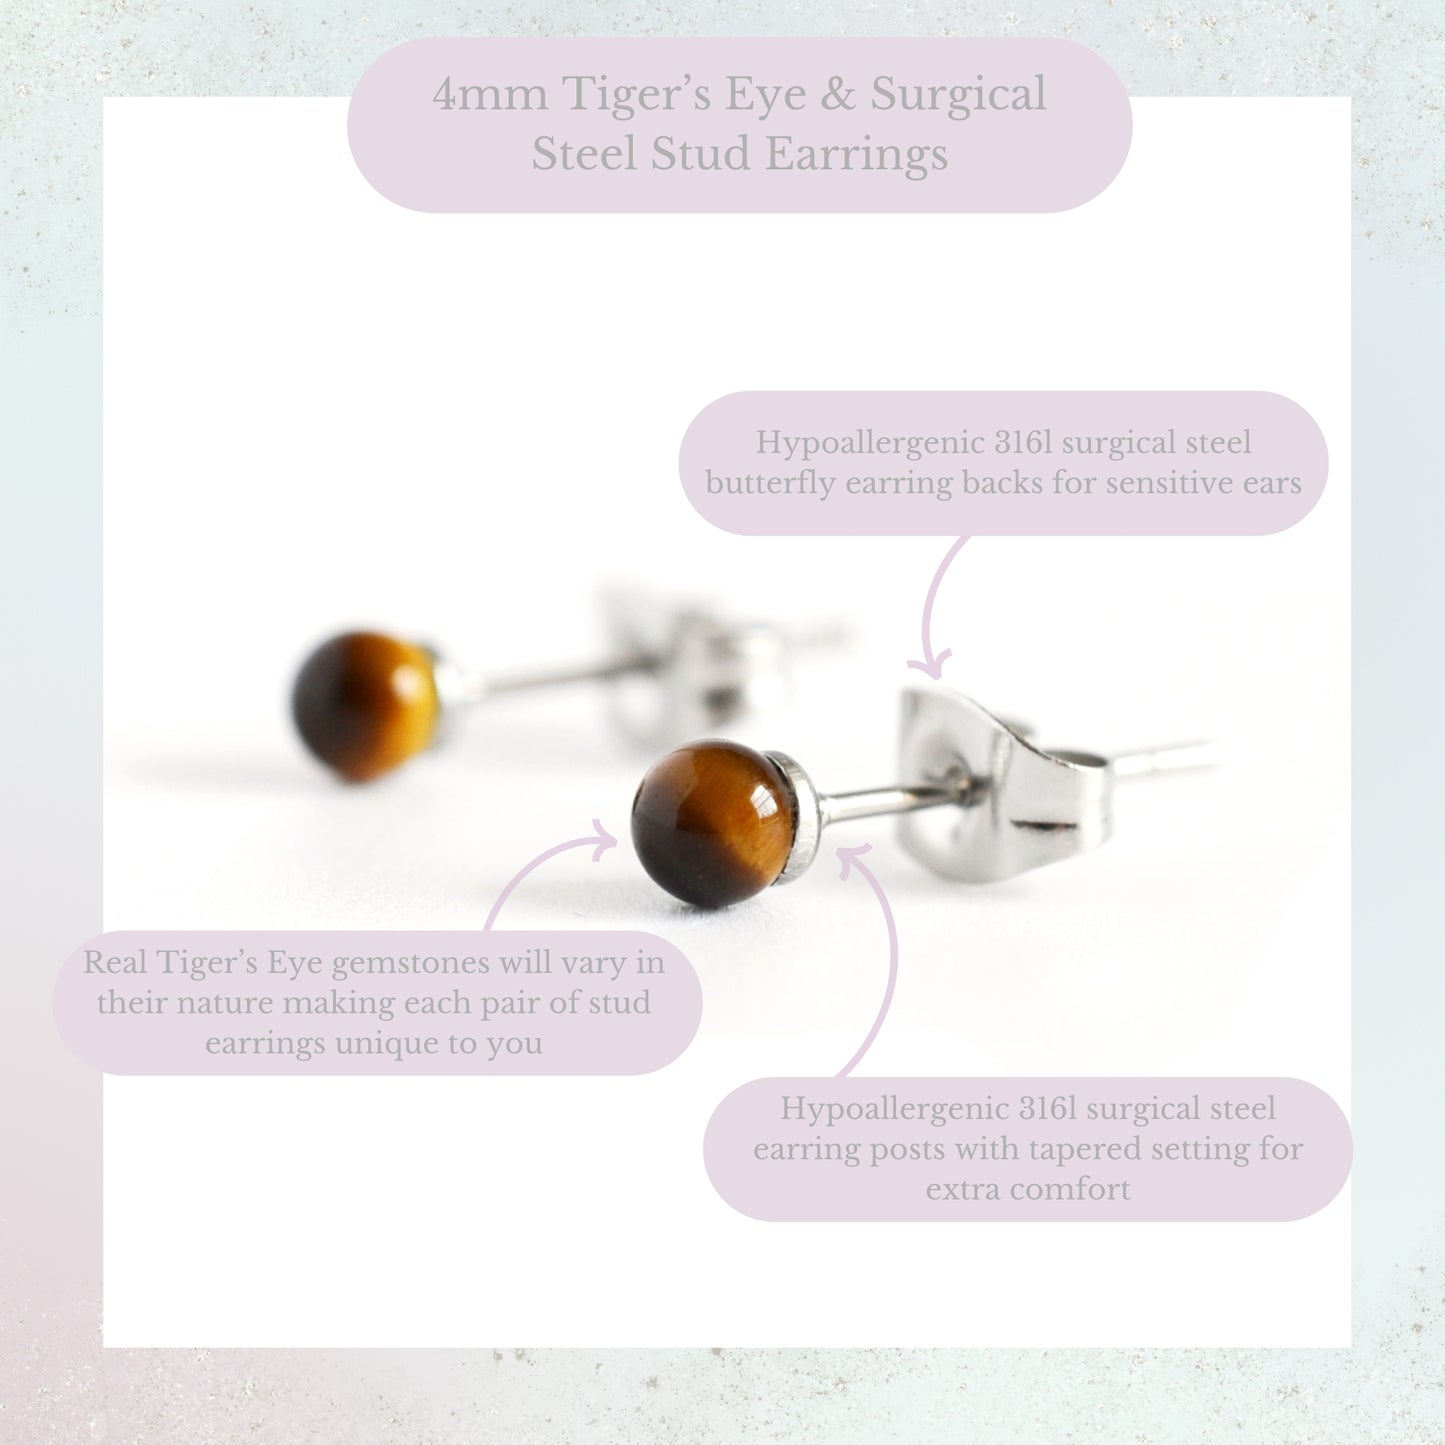 Product information graphic for 4mm Tiger's Eye & surgical steel stud earrings